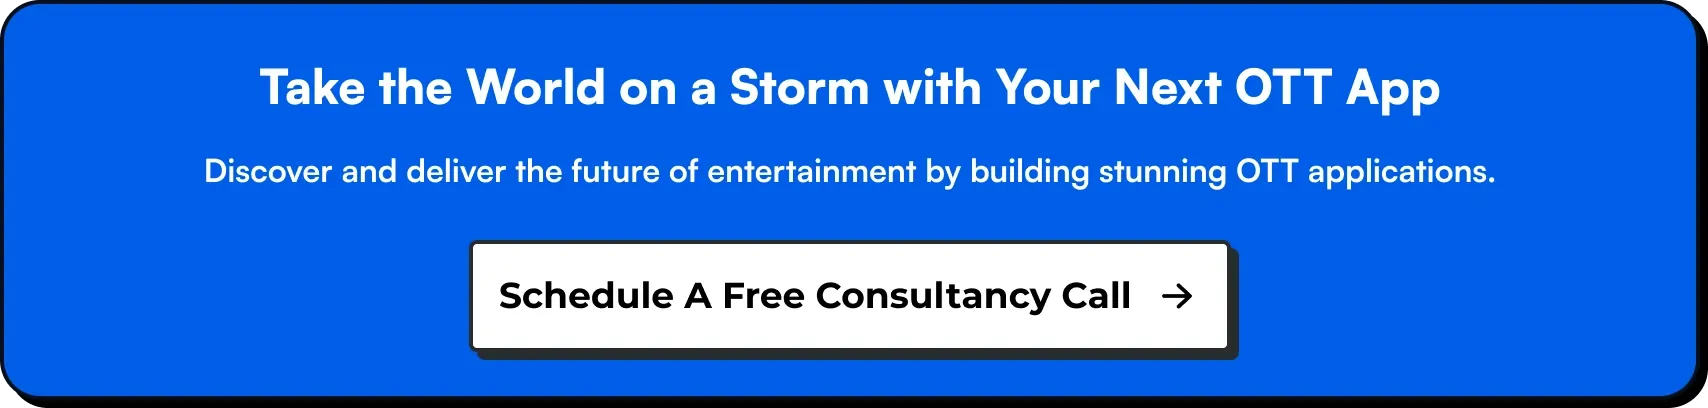 Take the World on a Storm with Your Next OTT App.  Discover and deliver the future of entertainment by building stunning OTT applications. Schedule a Free consultancy call with SolGuruz!